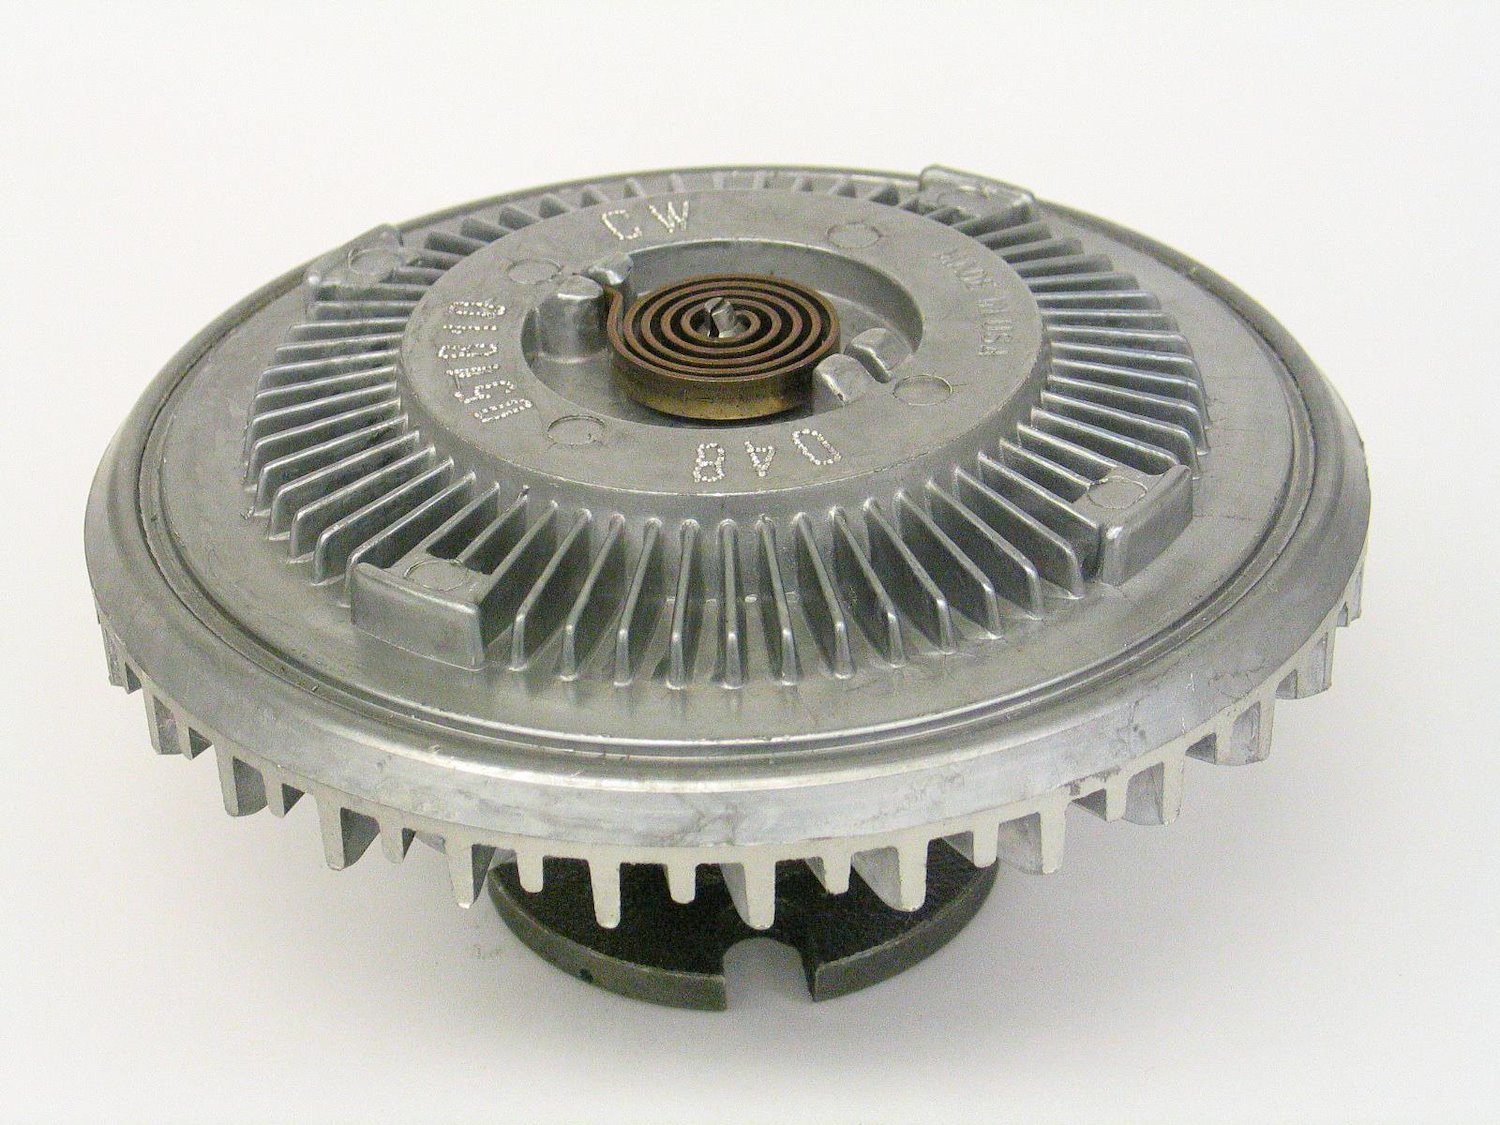 Standard Duty Thermal Fan Clutch for 1980-1990 AMC/Jeep L4/L6 & 1983-1985 Chevy S10